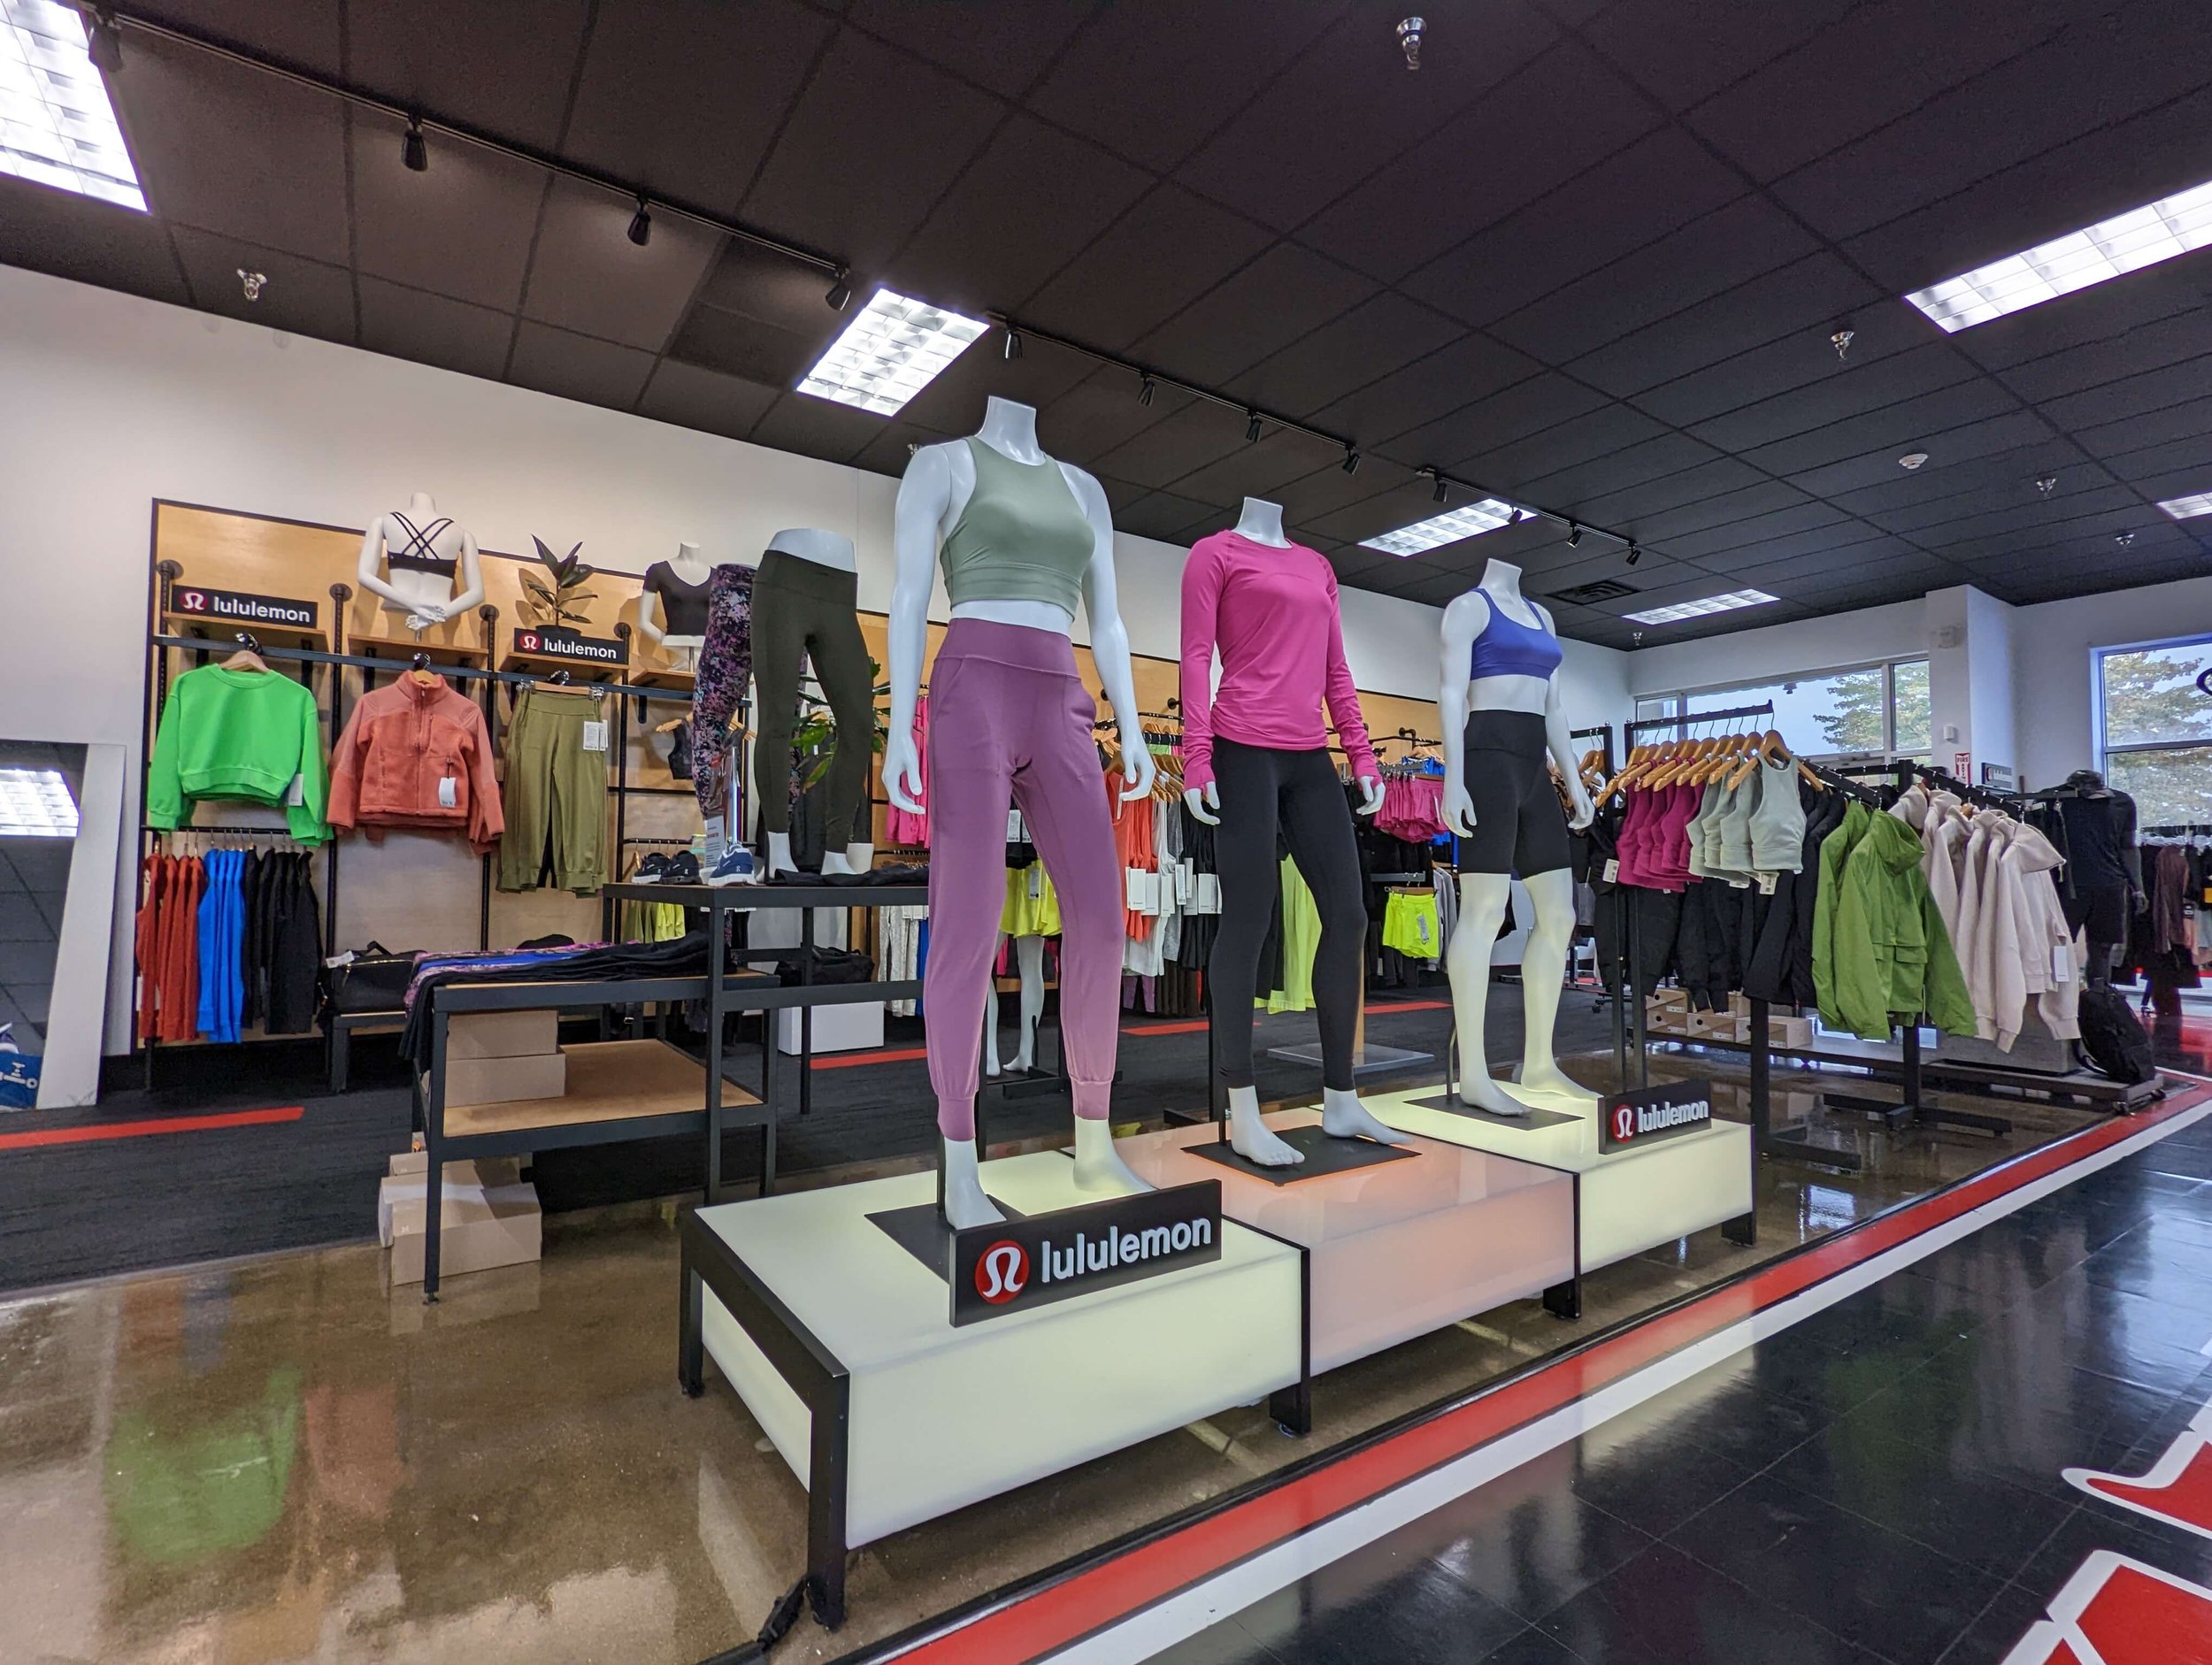 lululemon in Michigan, now available in Saginaw, Midland, and